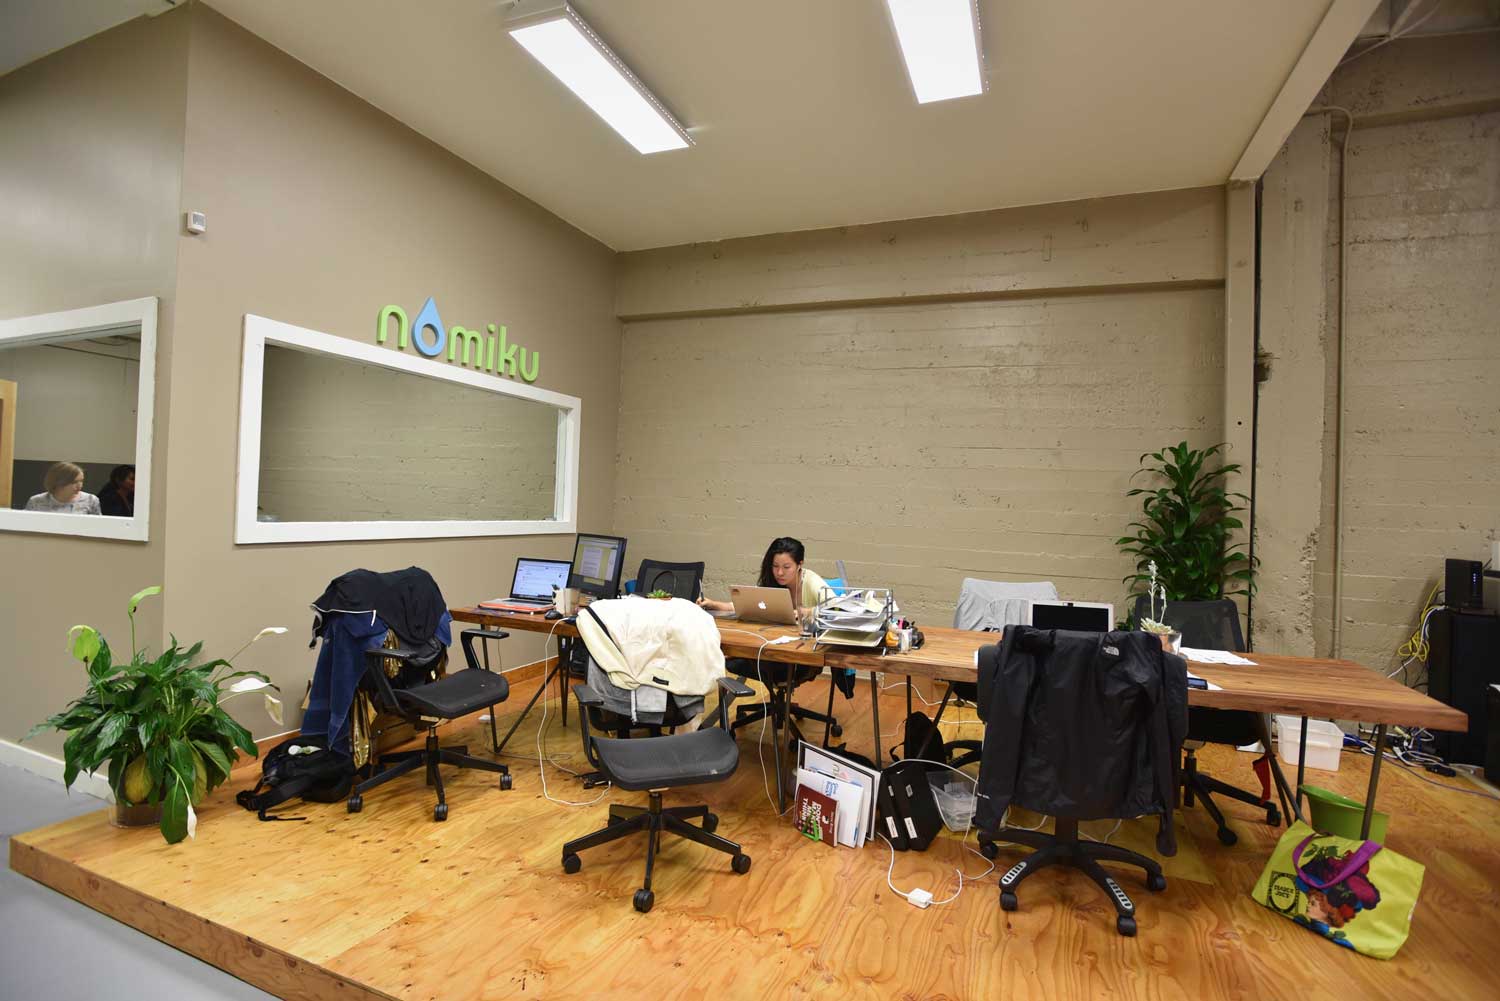 The small but mighty Nomiku team at work in their bright and airy industrial office